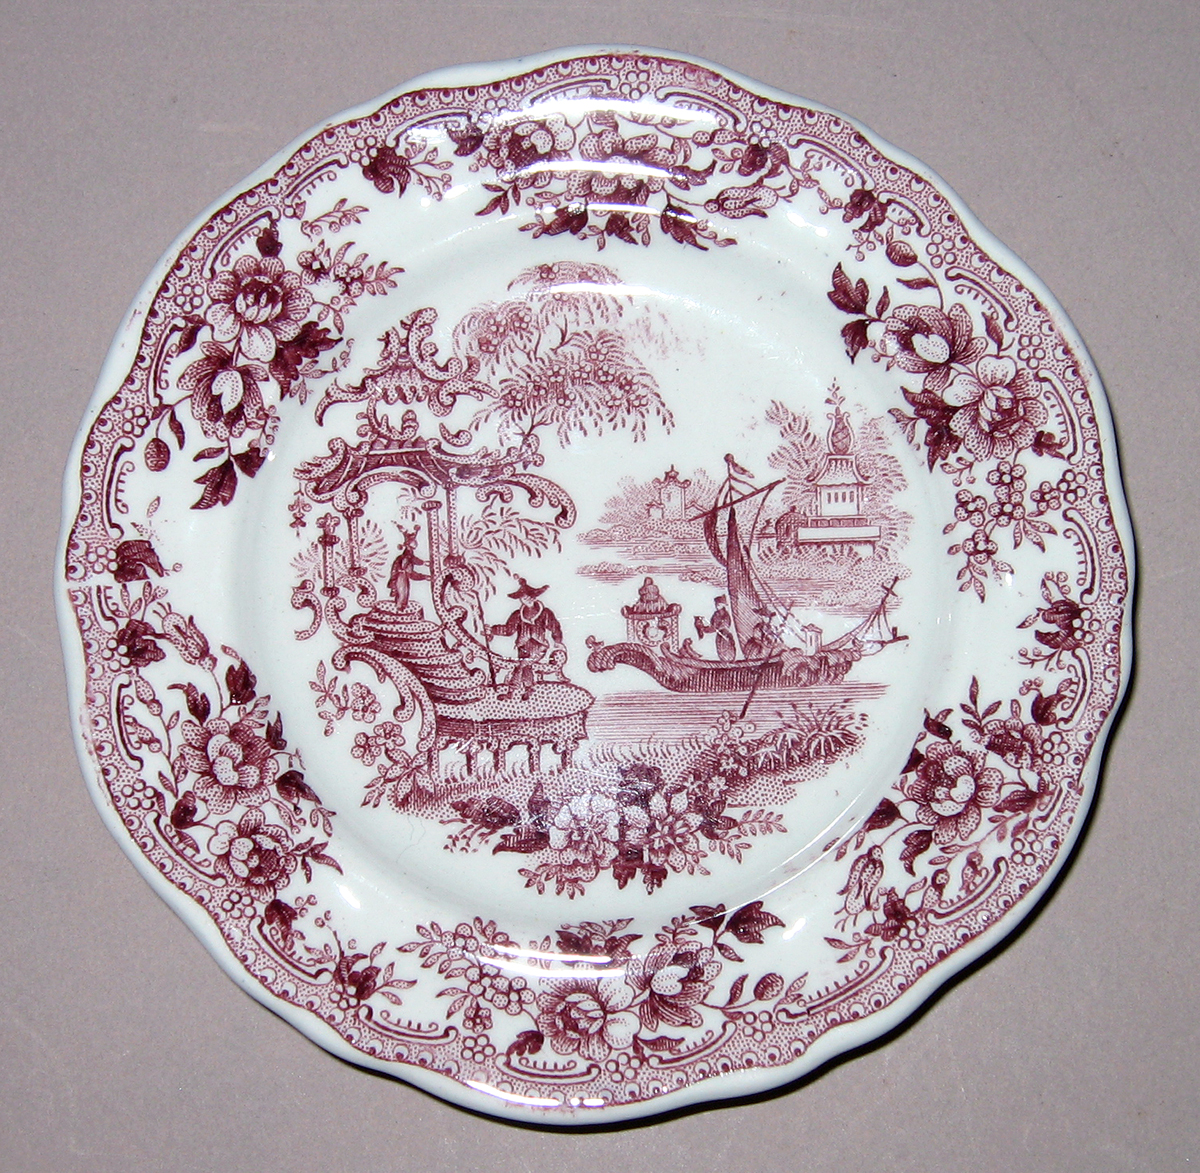 1955.0136.175 Miniature plate with chinoiserie printed scene